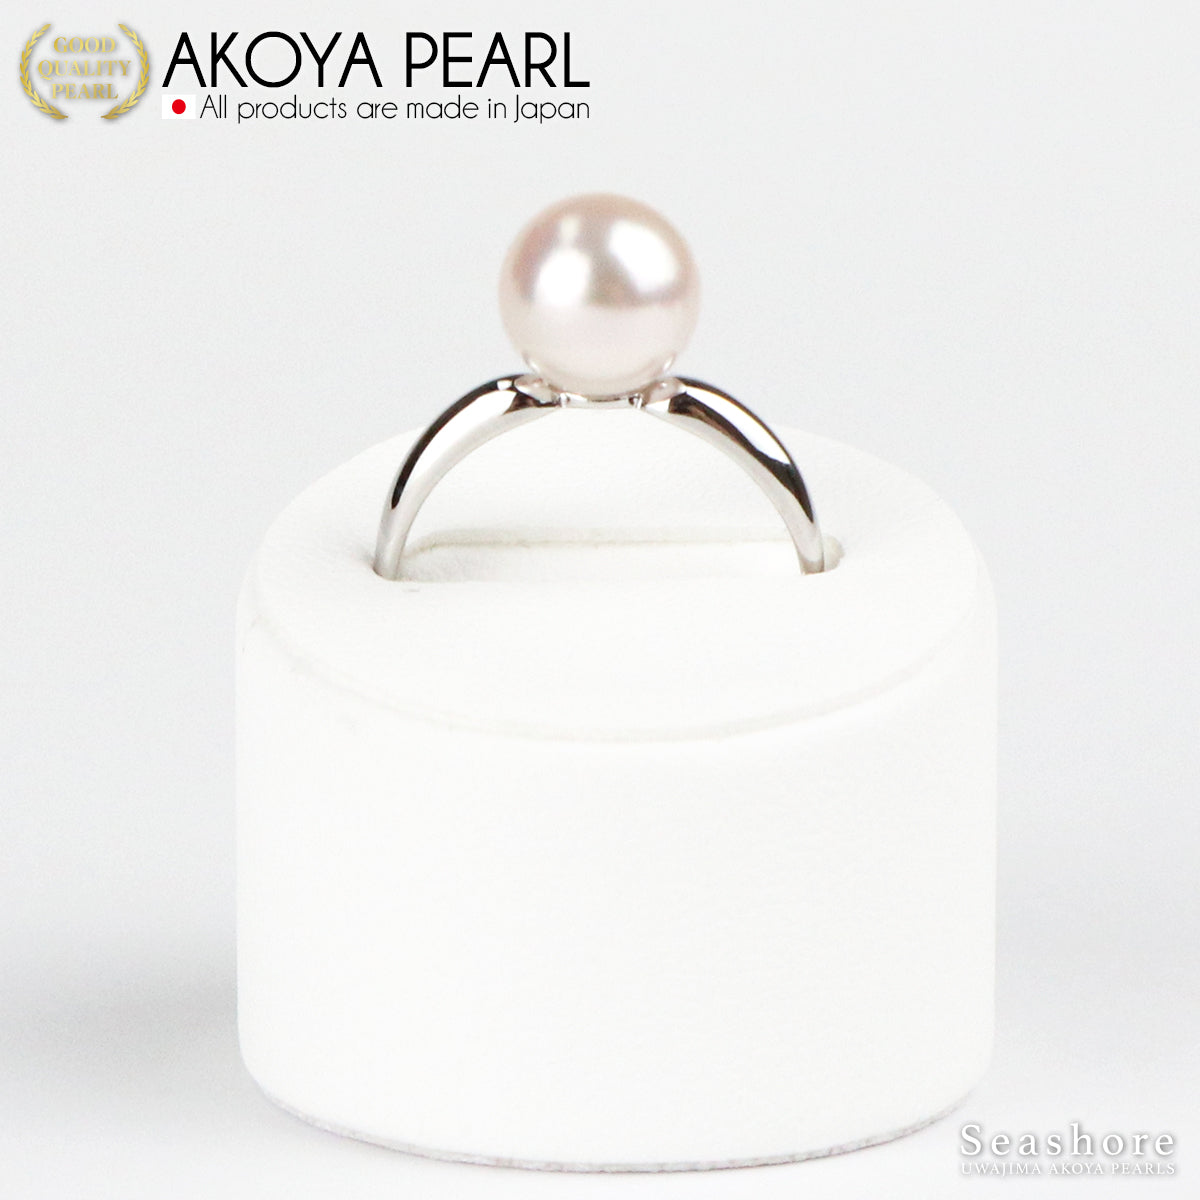 Hanadama Pearl Pearl Ring Ring Akoya Pearl [8.5-9.0mm] SV925 Platinum Finish No. 9/11/13/15 Comes with 5S Card Identification and Storage Case (3943)